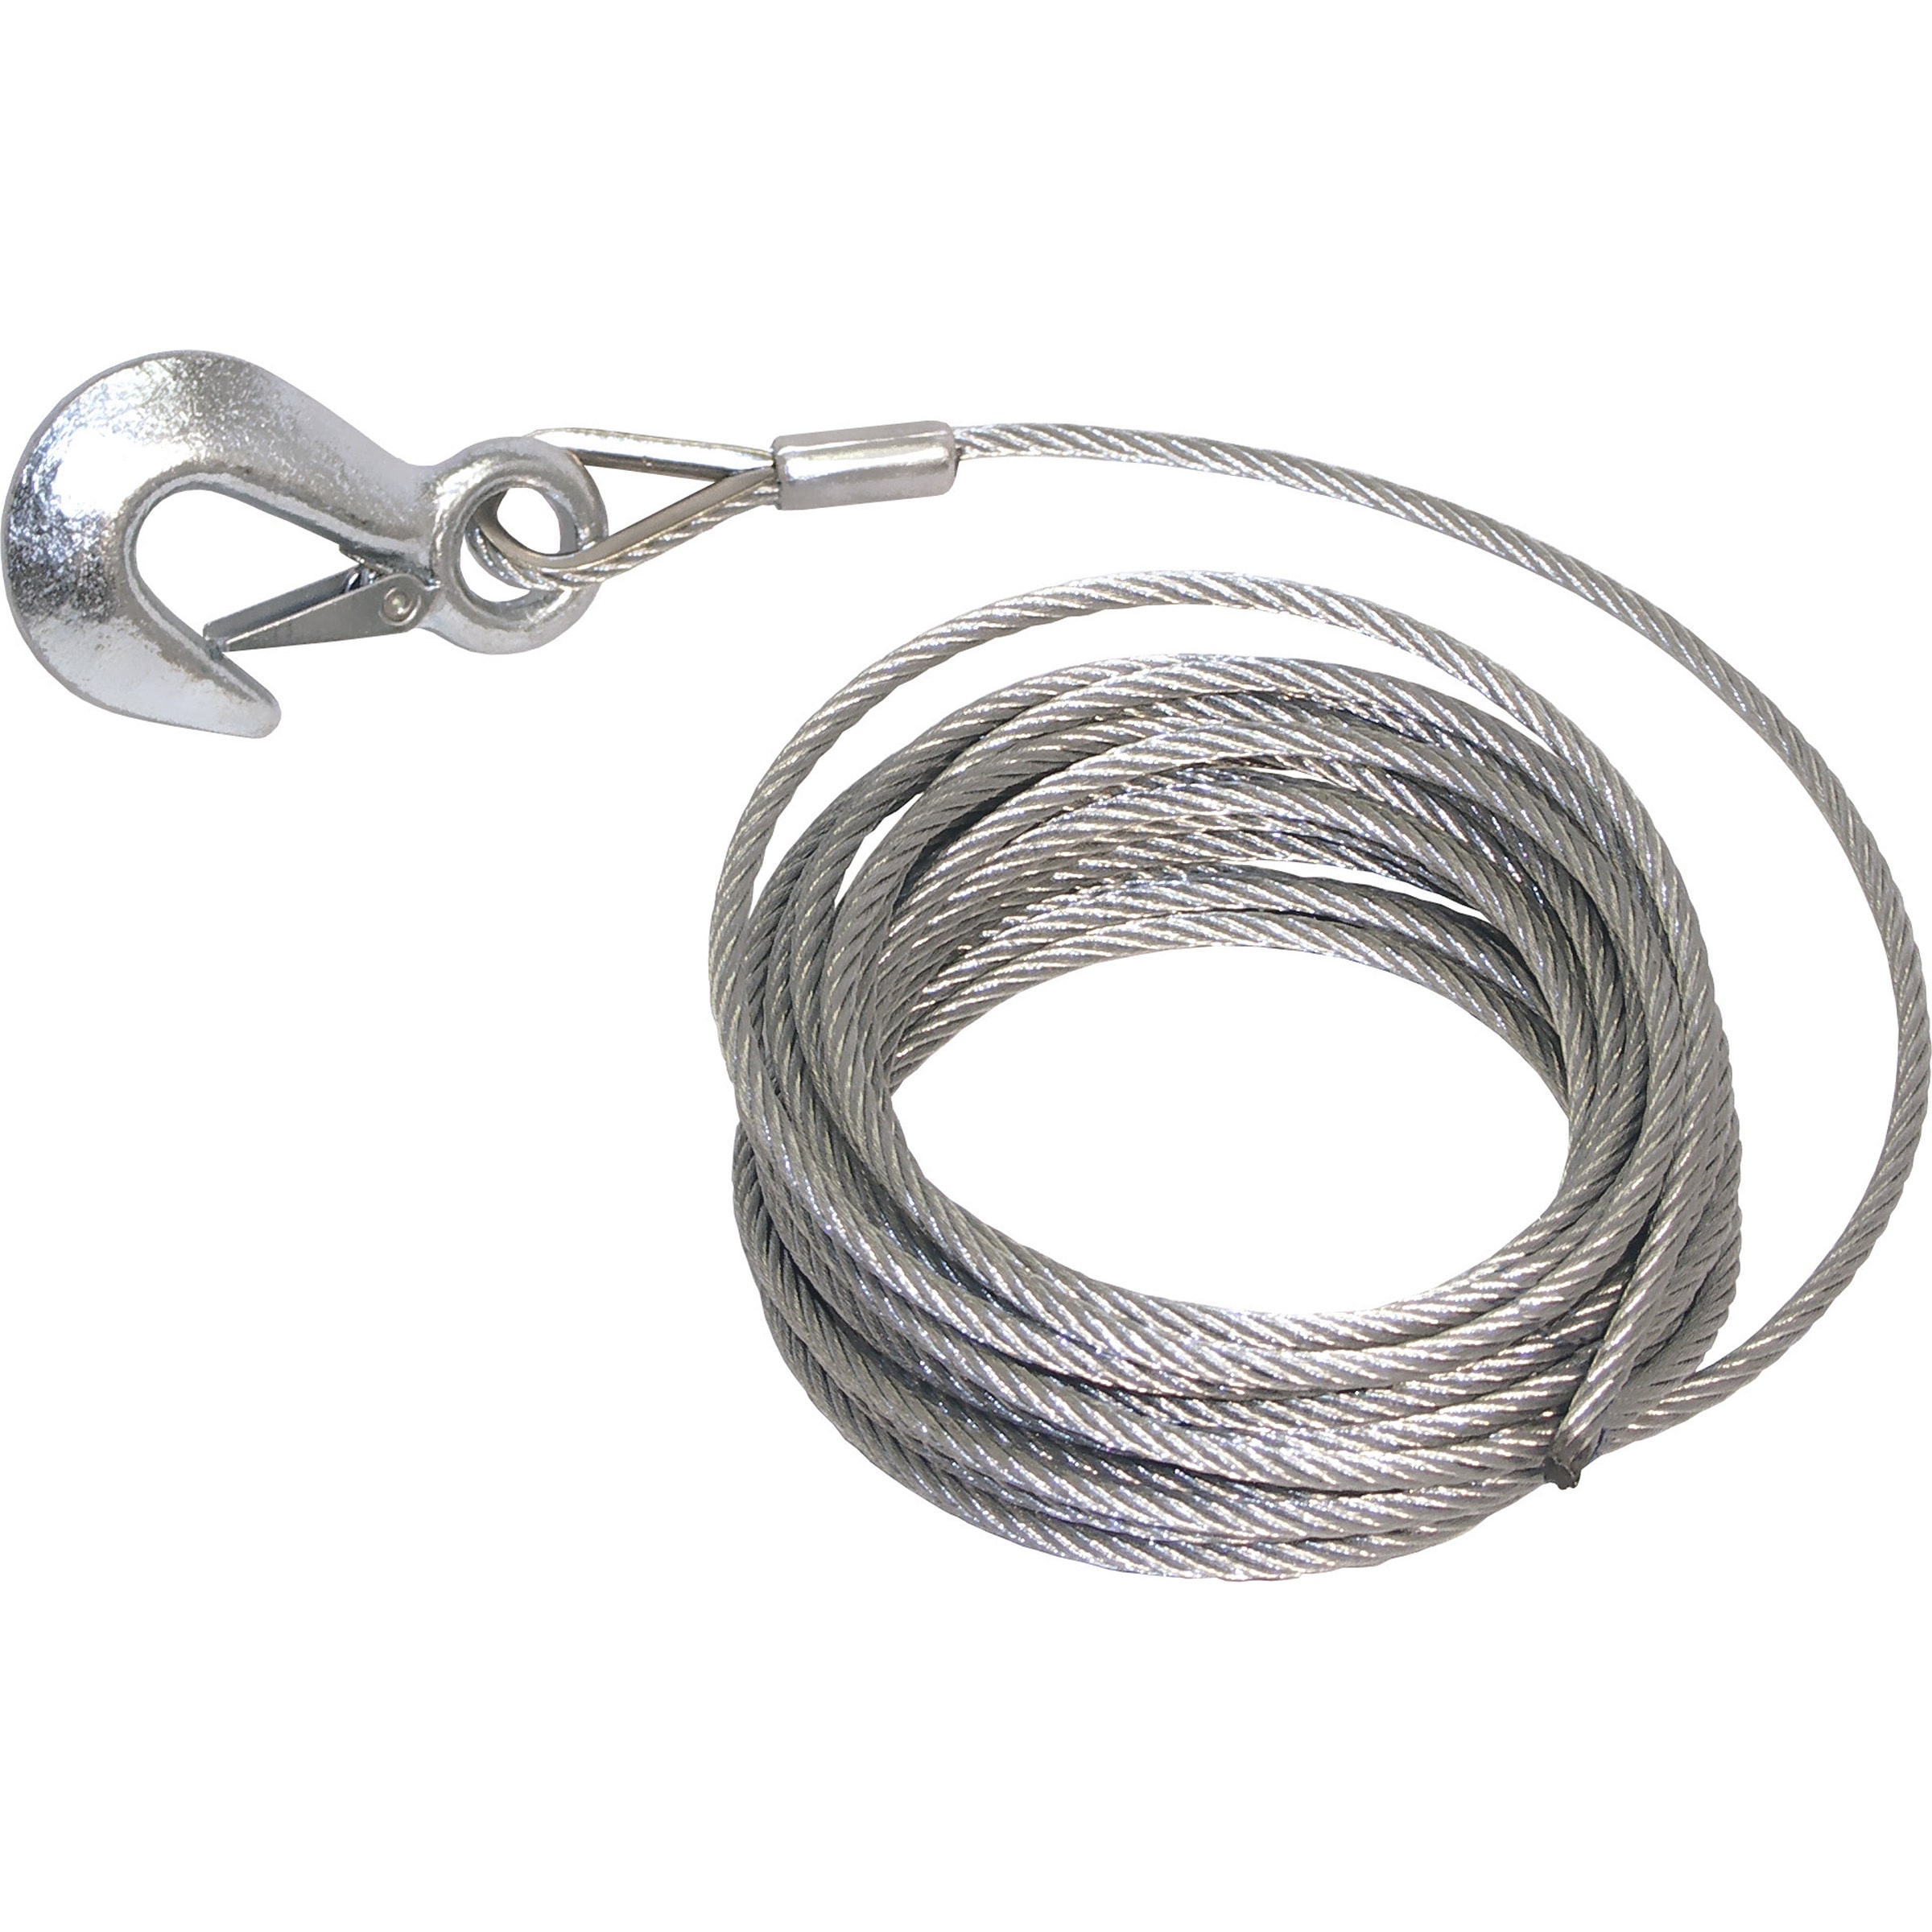 Shoreline Marine Winch Cable (3/16-Inch X 25-Feet) - image 2 of 2